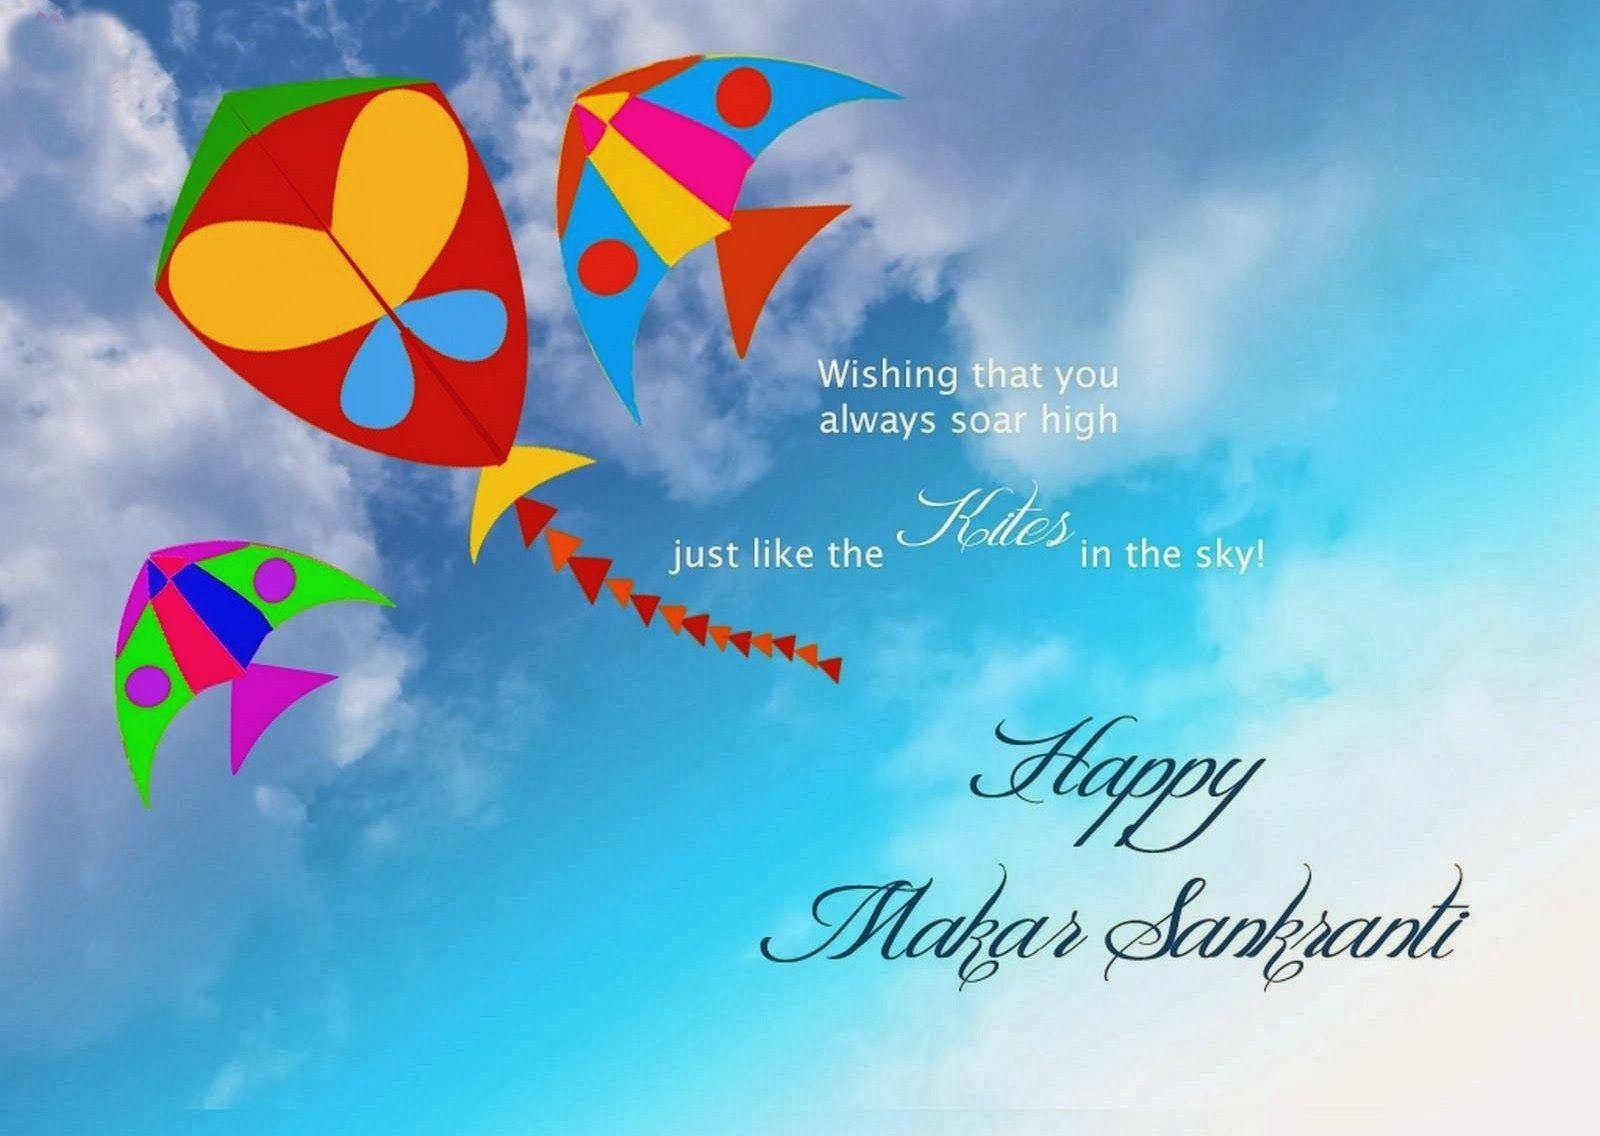 Happy Makar Sankranti Wallpaper and Wishes Messages